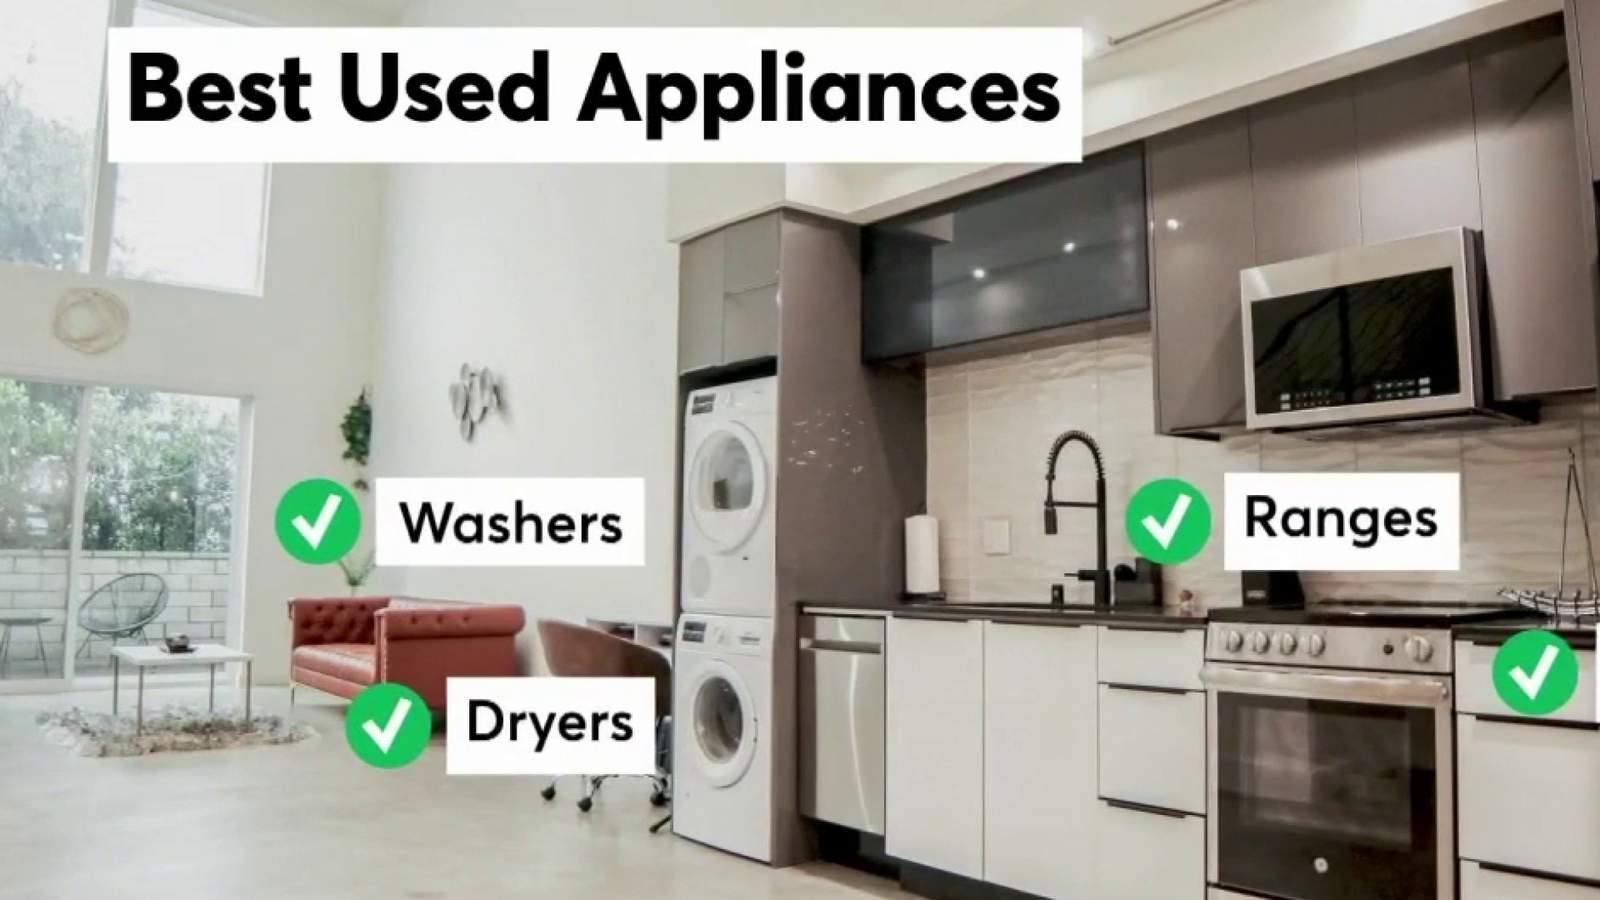 Should you buy a used appliance?